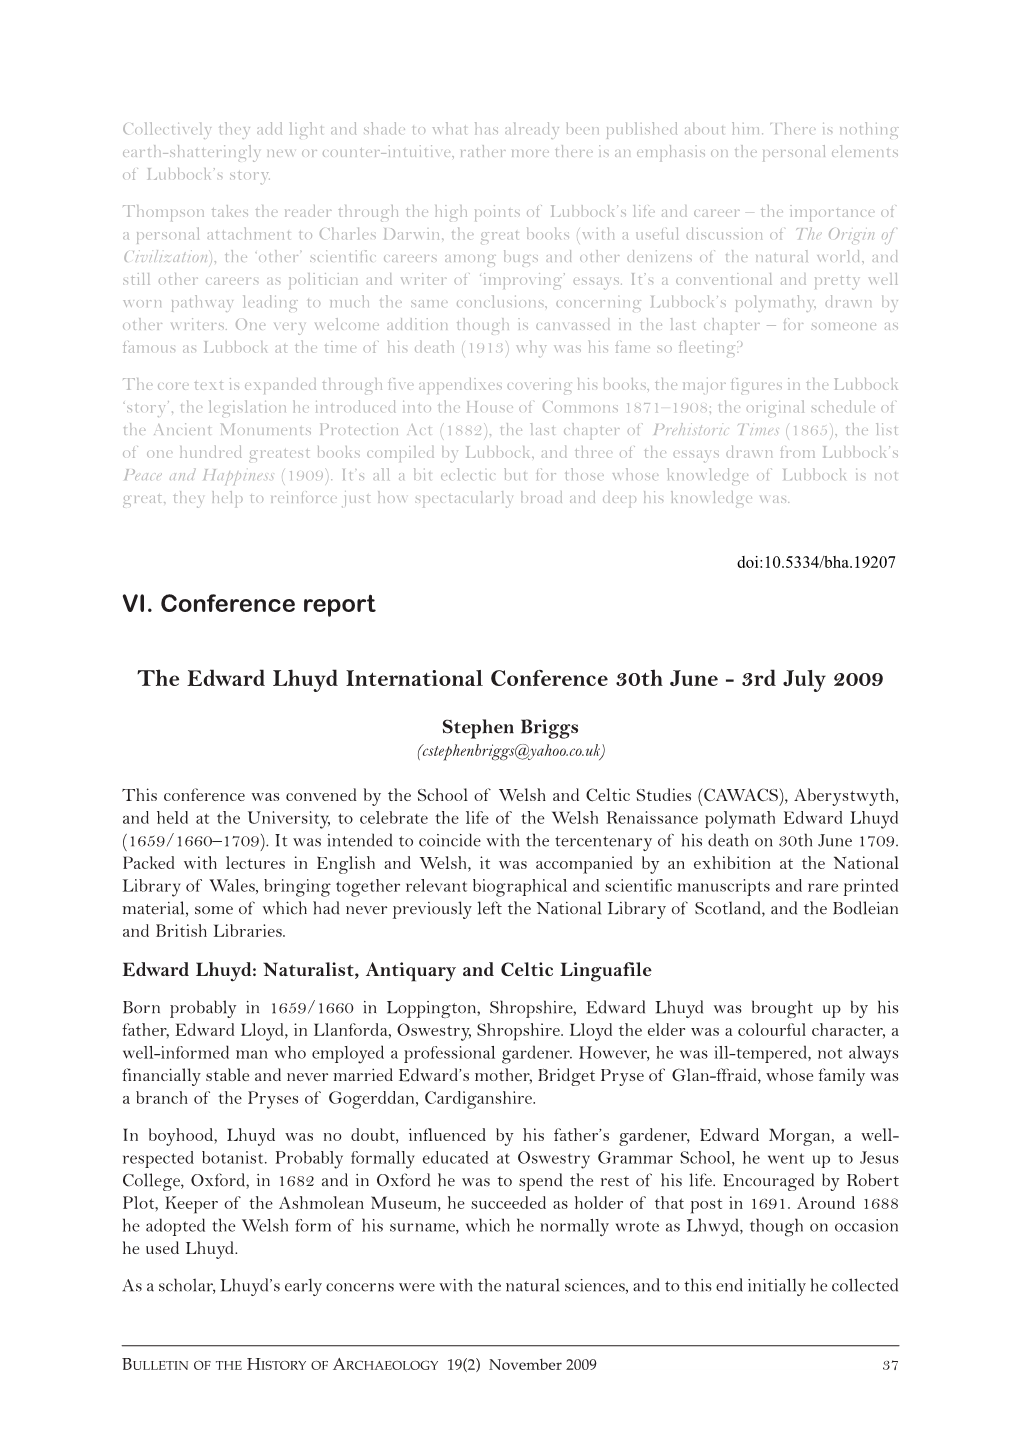 VI. Conference Report the Edward Lhuyd International Conference